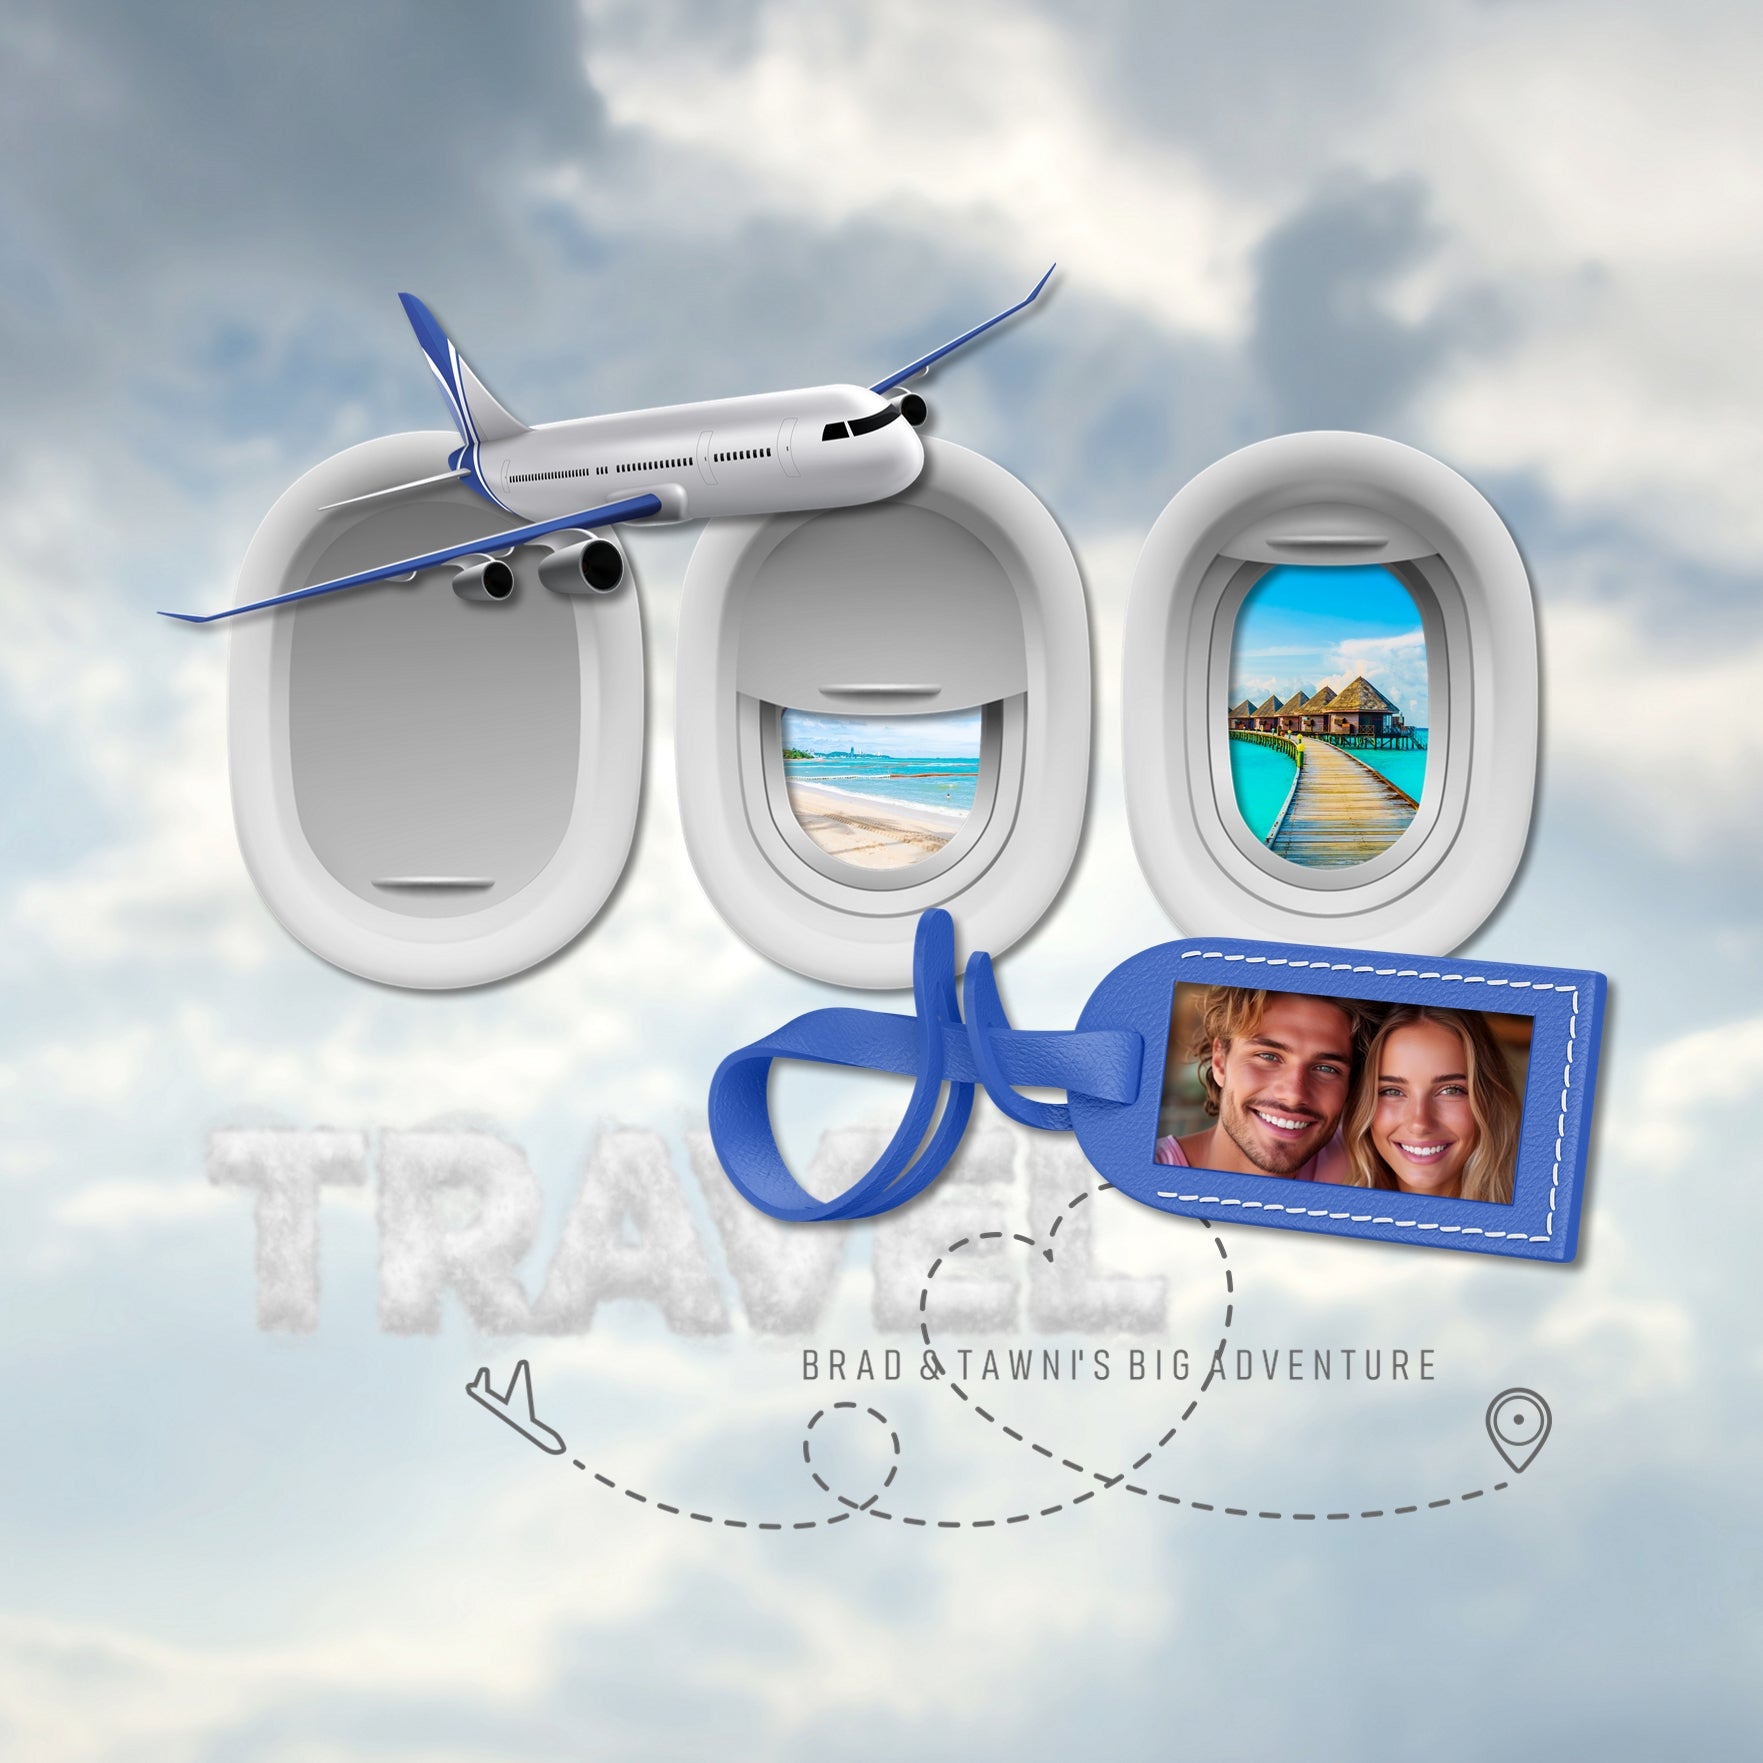 If you are taking to the air for a holiday, then get scrapping with this fun airport, aviation, airplane, and flight themed digital art bundle by Lucky Girl Creative. Whether it is a business trip or for vacation, if you going through an airport and into the sky on your way to your destination, this travel kit is for you. Great for those in the airline industry, flight attendants, airport staff, and airplane hobbyists, too!